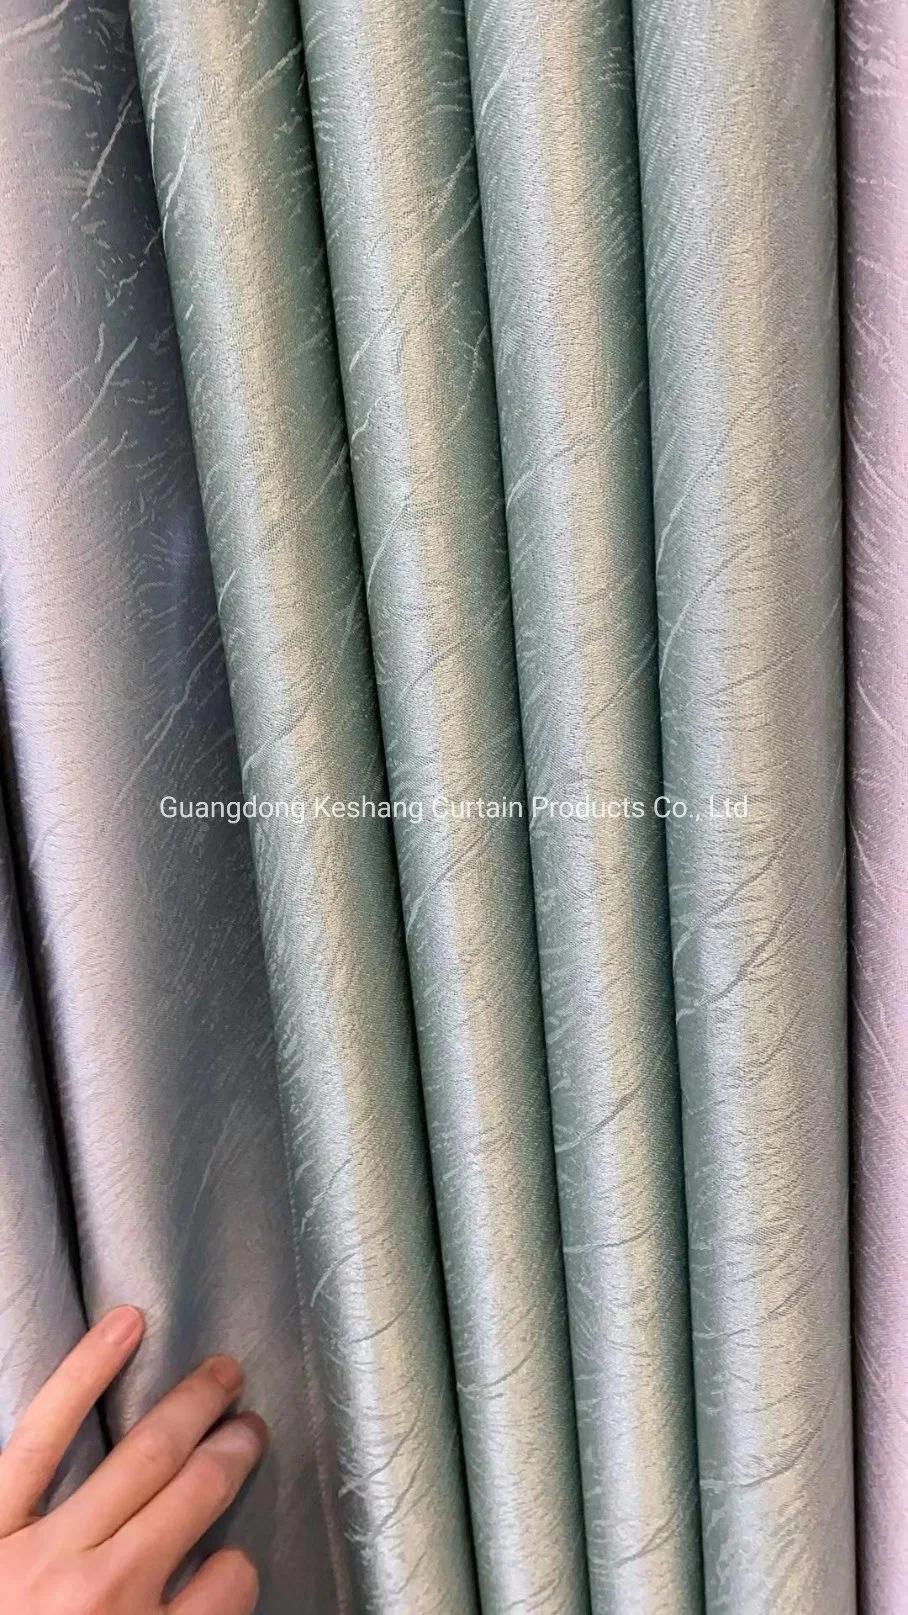 High Quality 100% Polyester Drapes Curtain Times Satin Fabric Woven Home Curtain